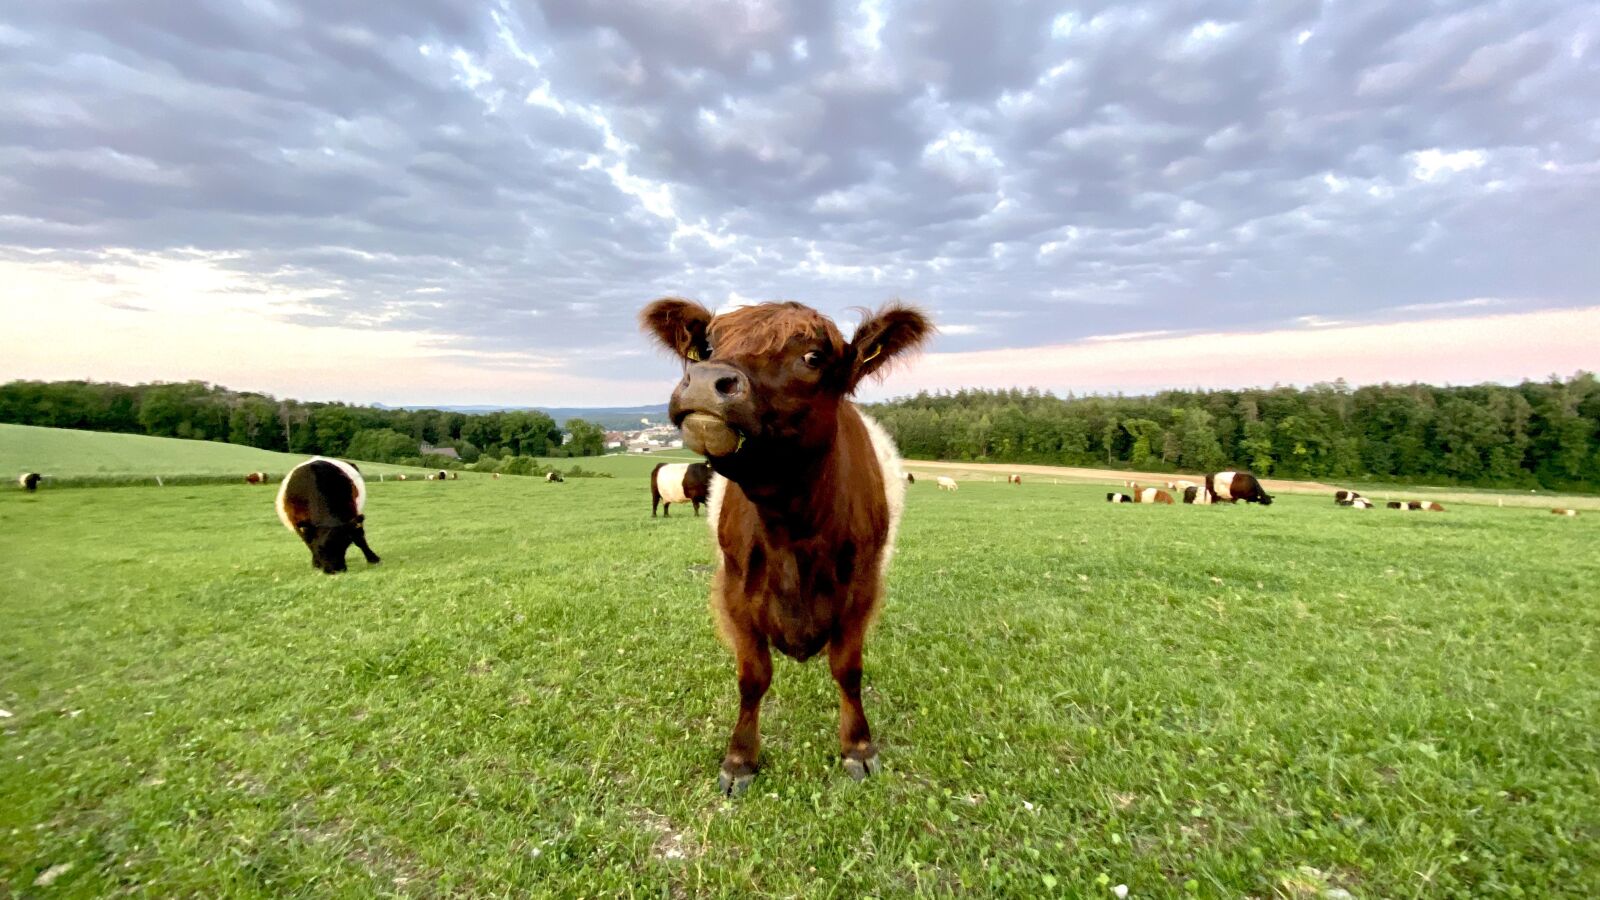 iPhone 11 Pro back triple camera 1.54mm f/2.4 sample photo. Cow, galloway, animal photography